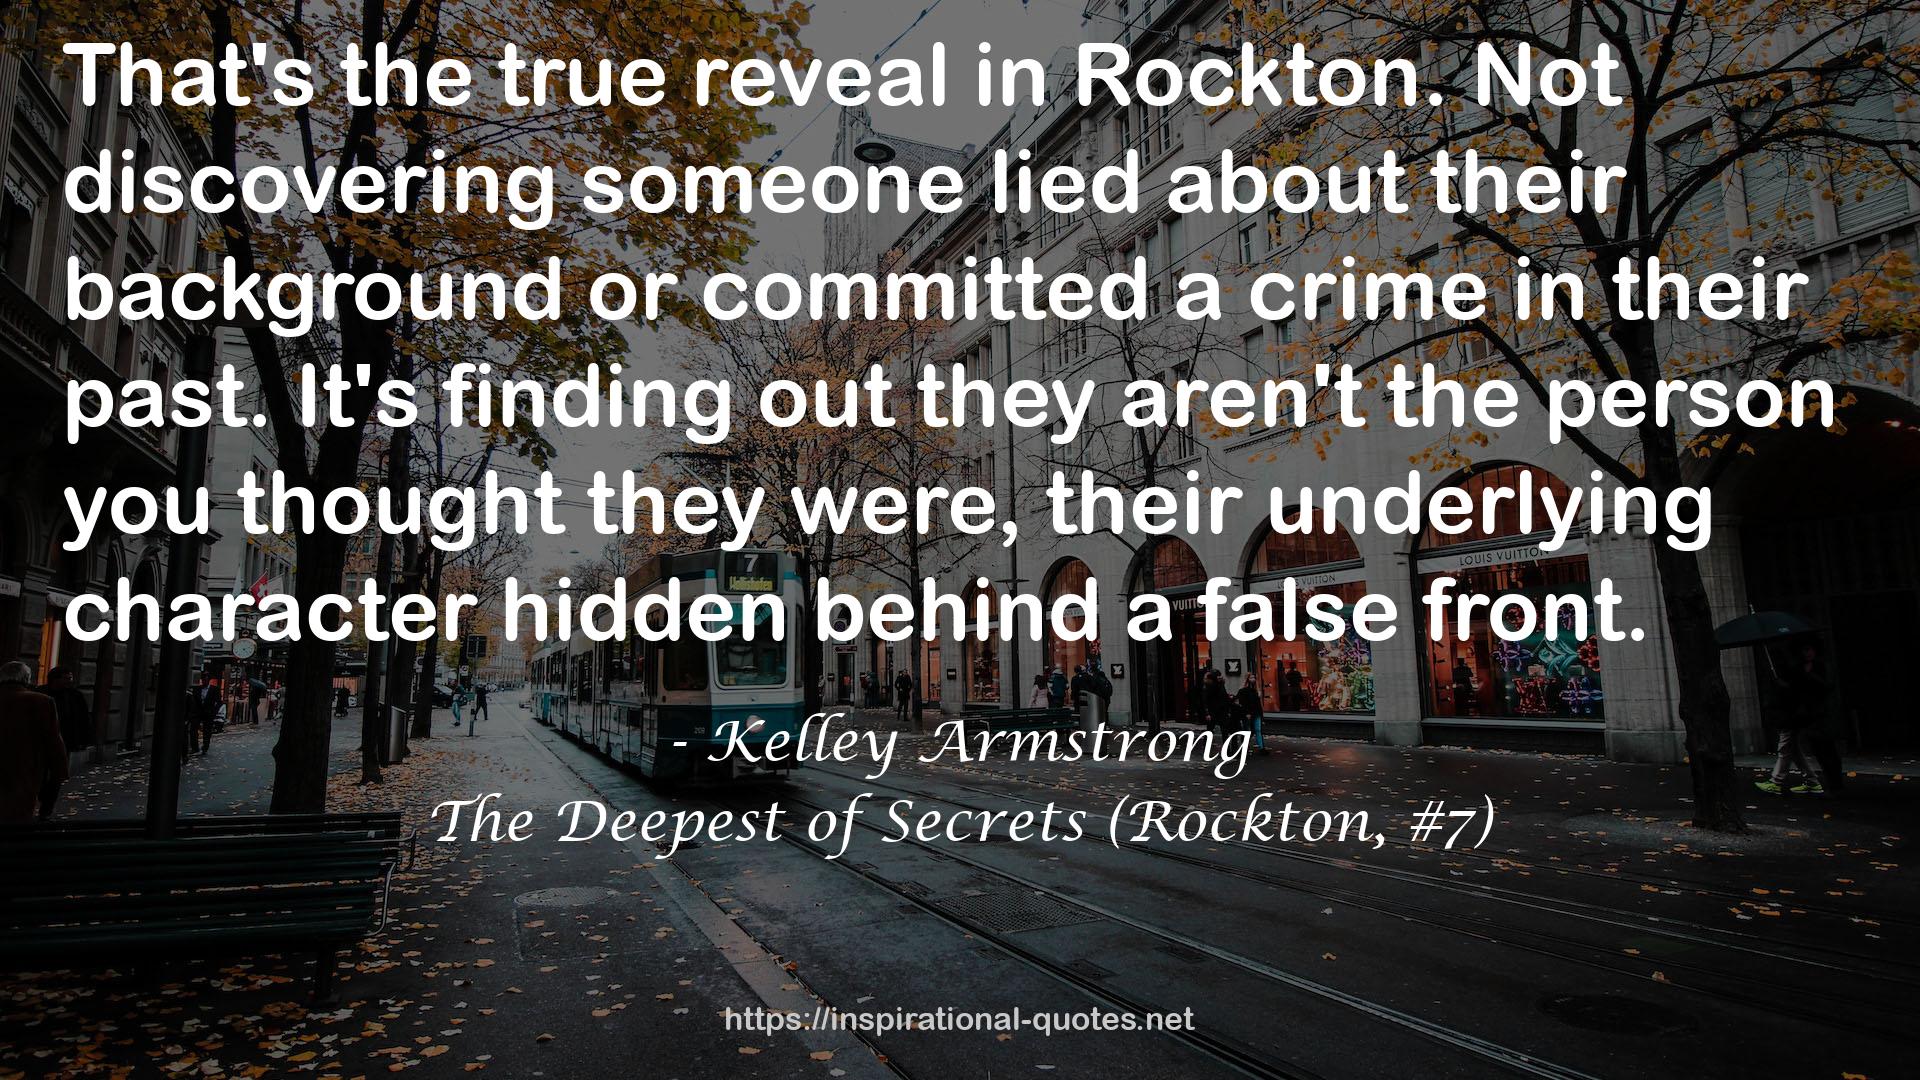 The Deepest of Secrets (Rockton, #7) QUOTES